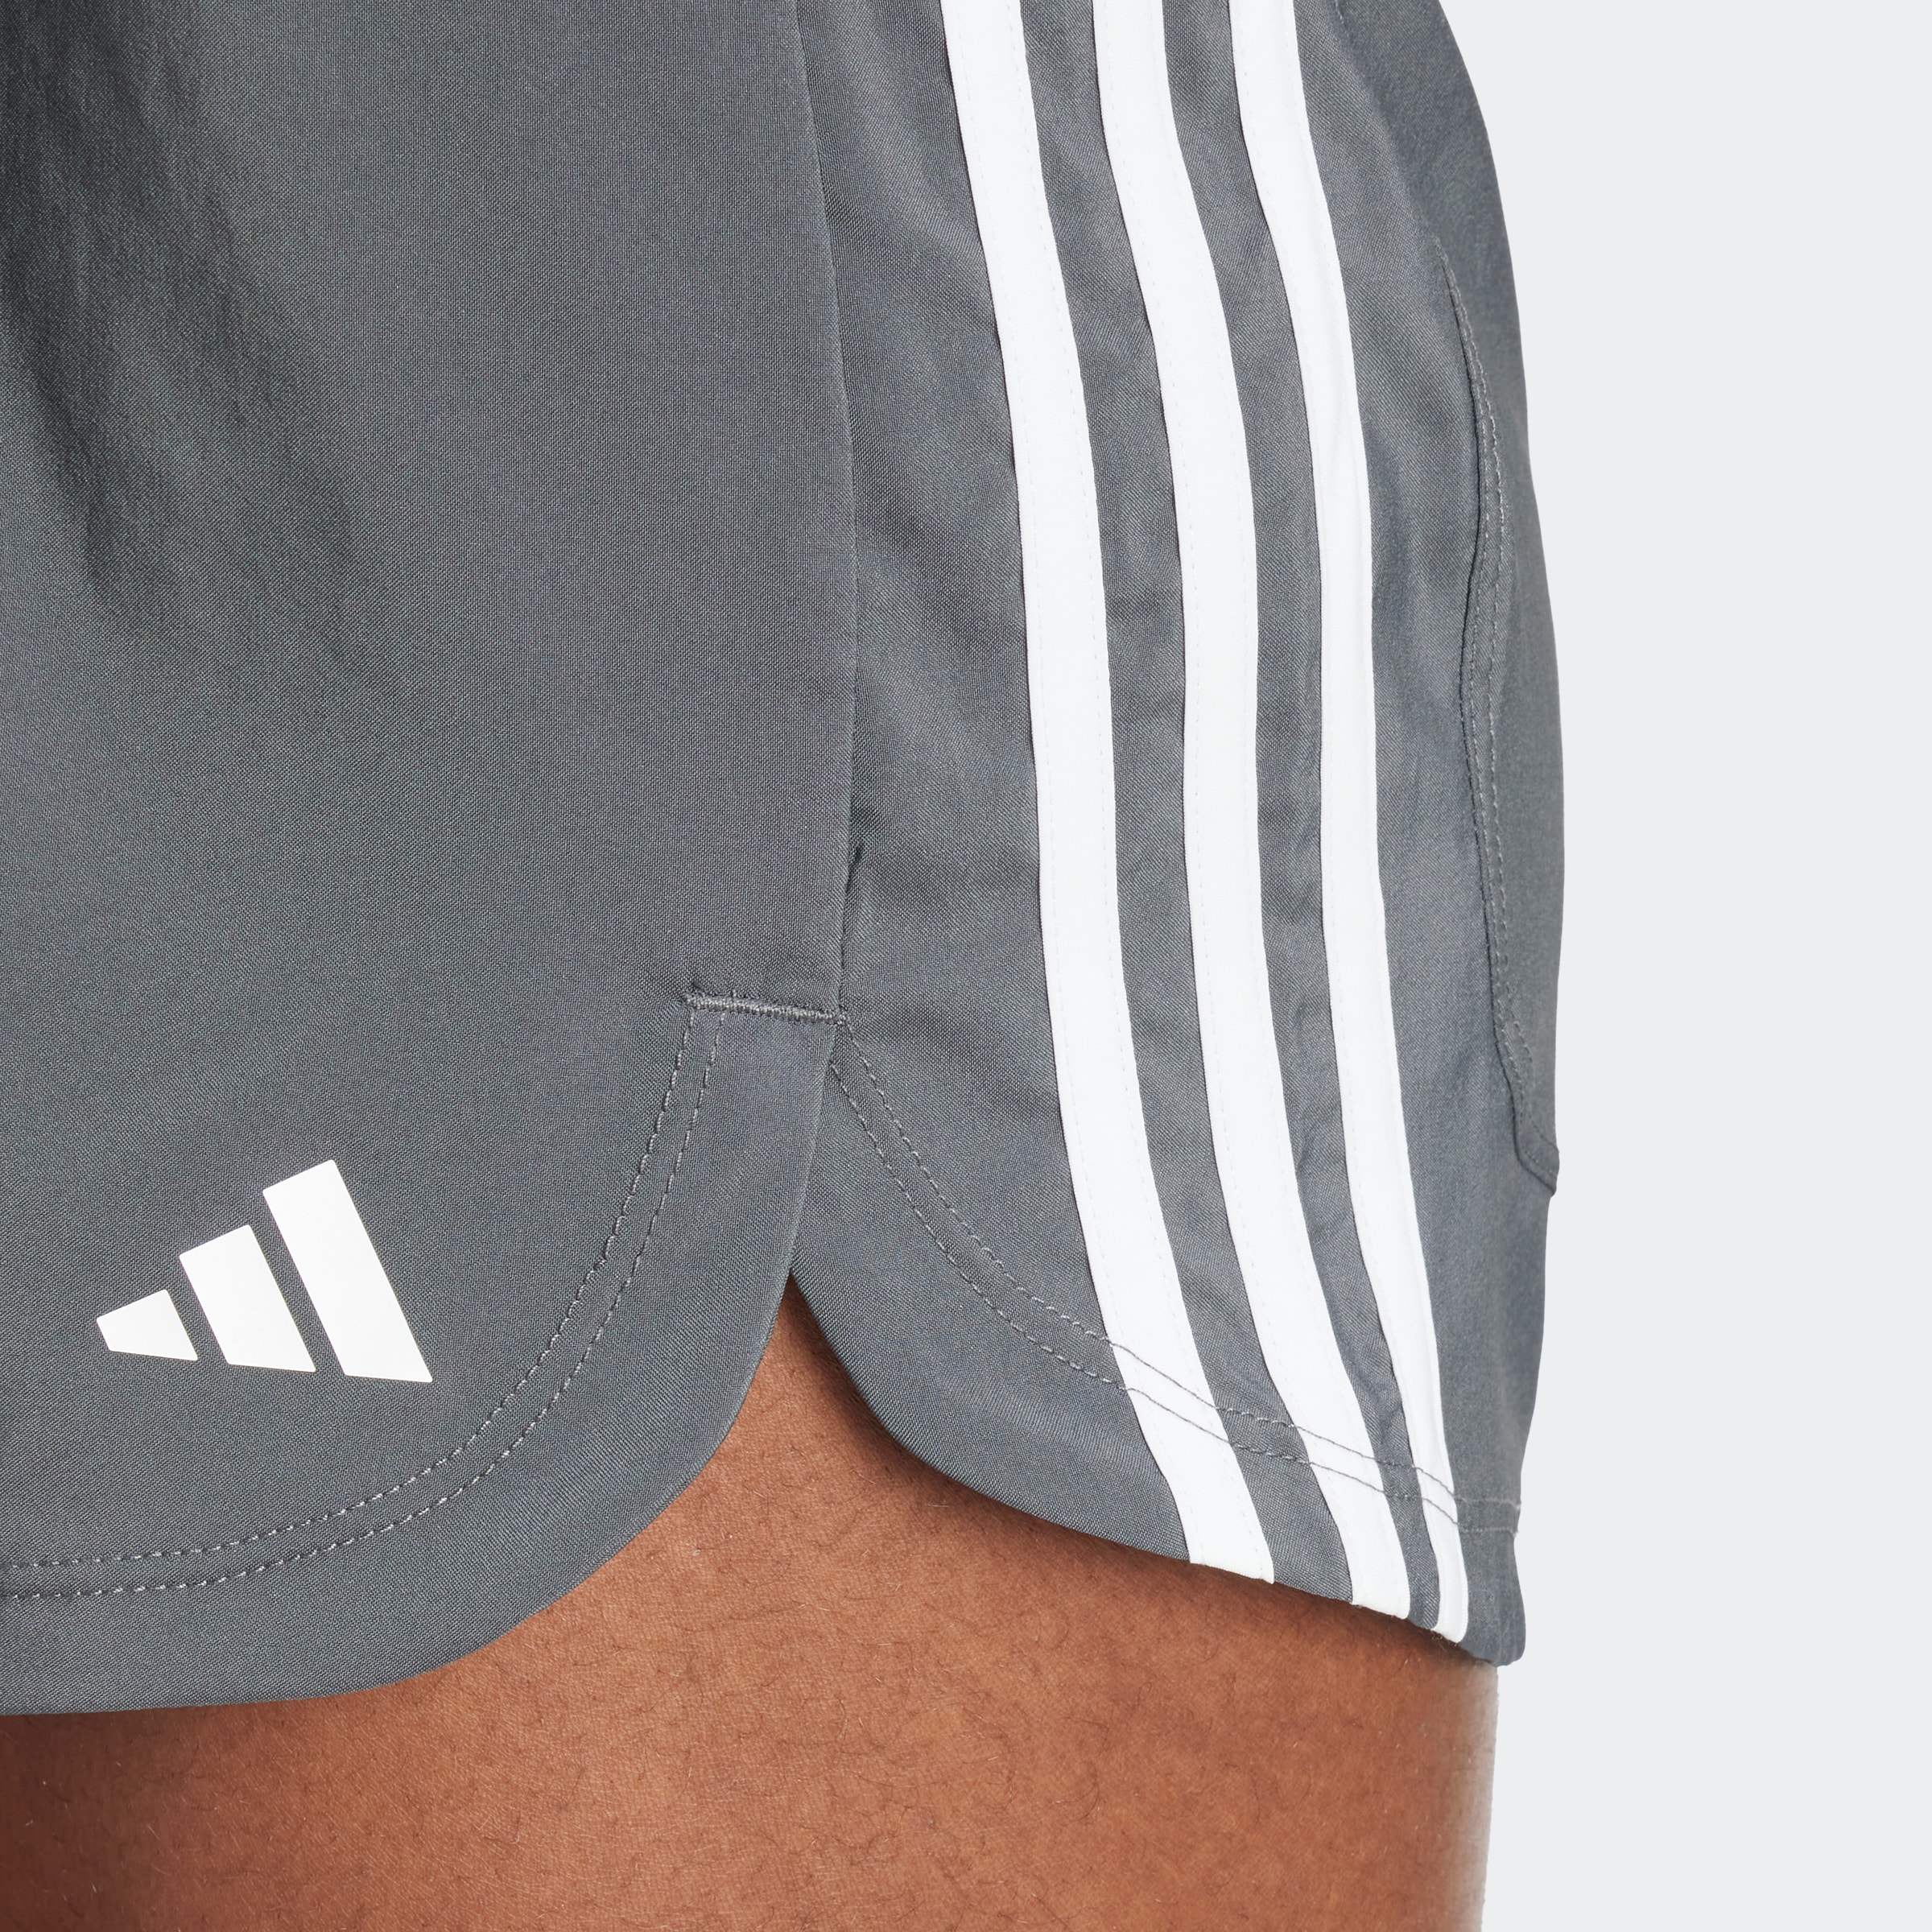 adidas Performance Shorts »PACER WVN HIGH«, (1 tlg.)